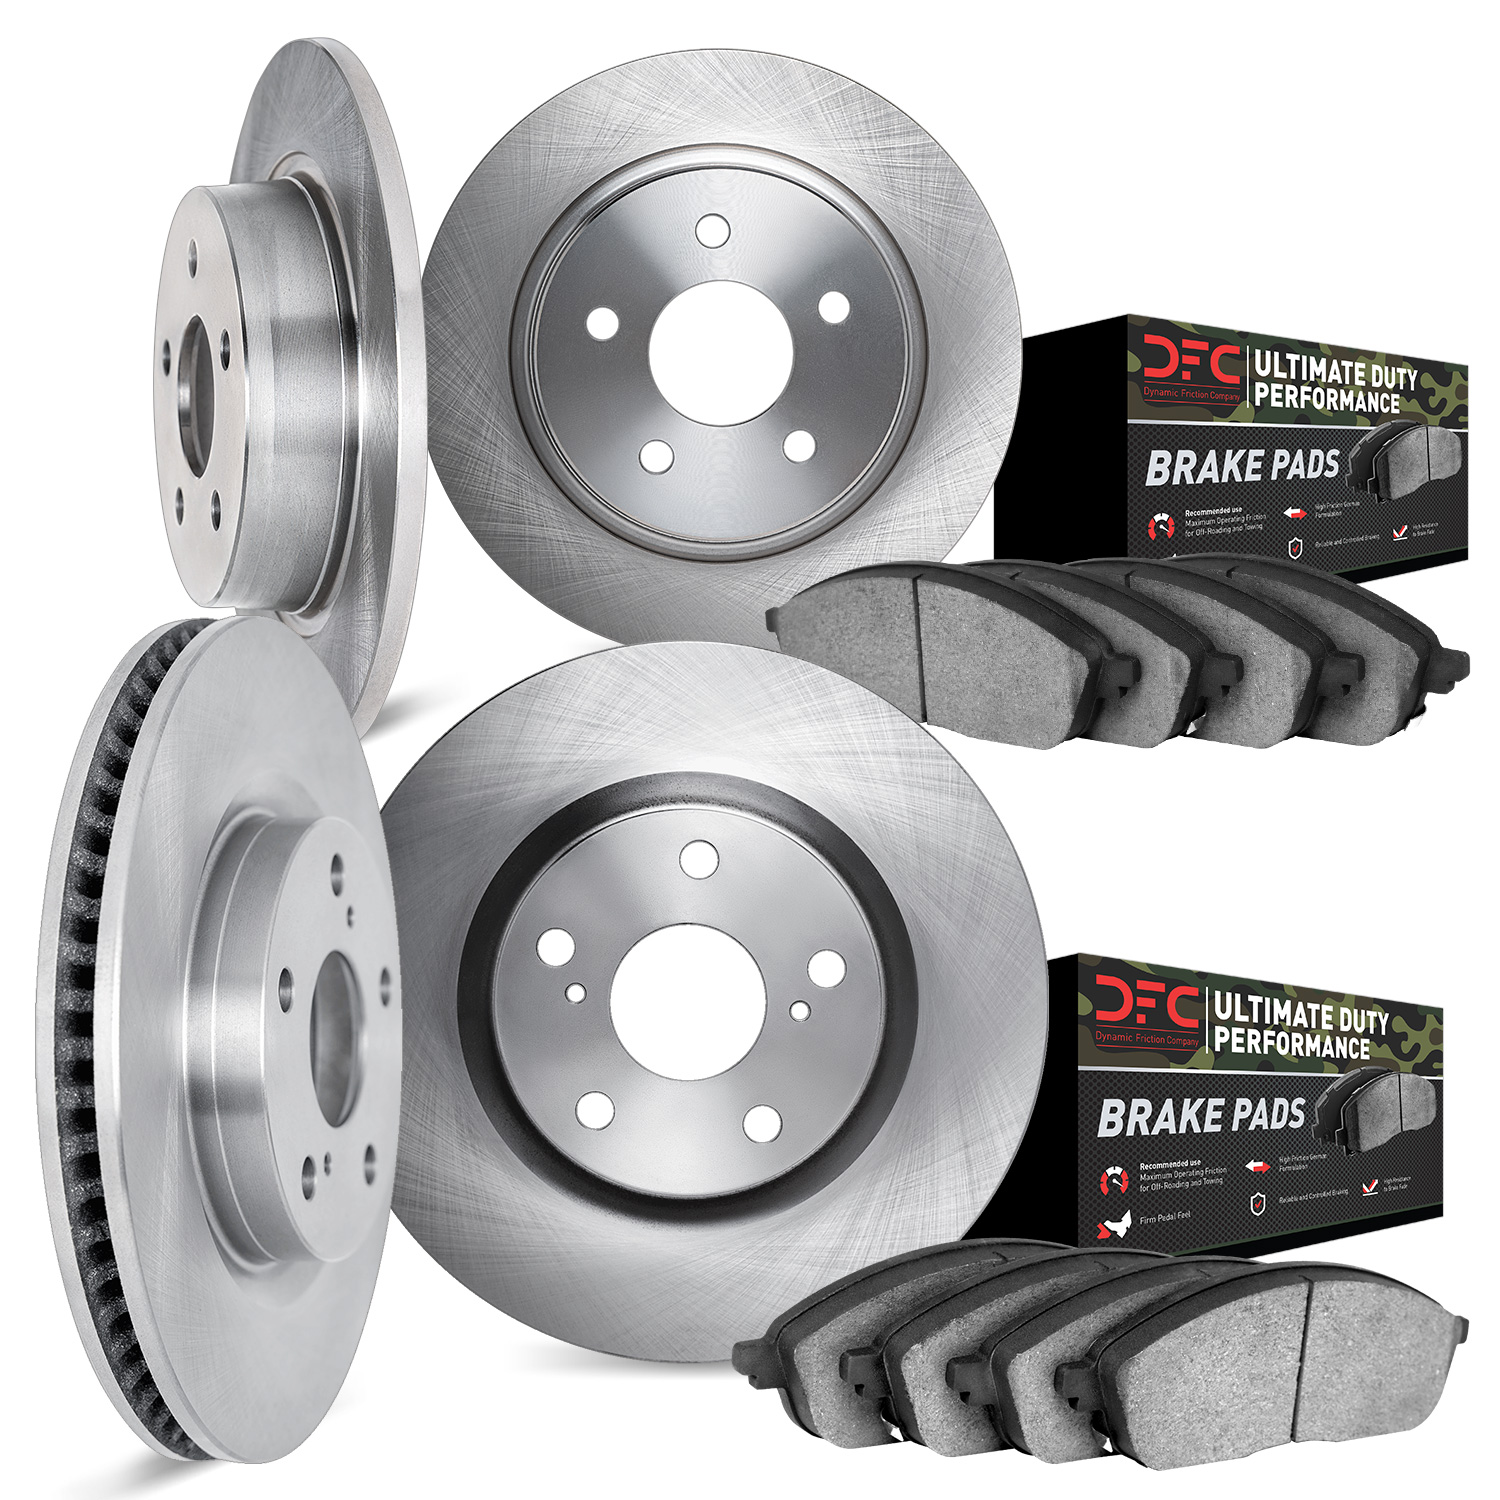 6404-42003 Brake Rotors with Ultimate-Duty Brake Pads, 2005-2010 Mopar, Position: Front and Rear